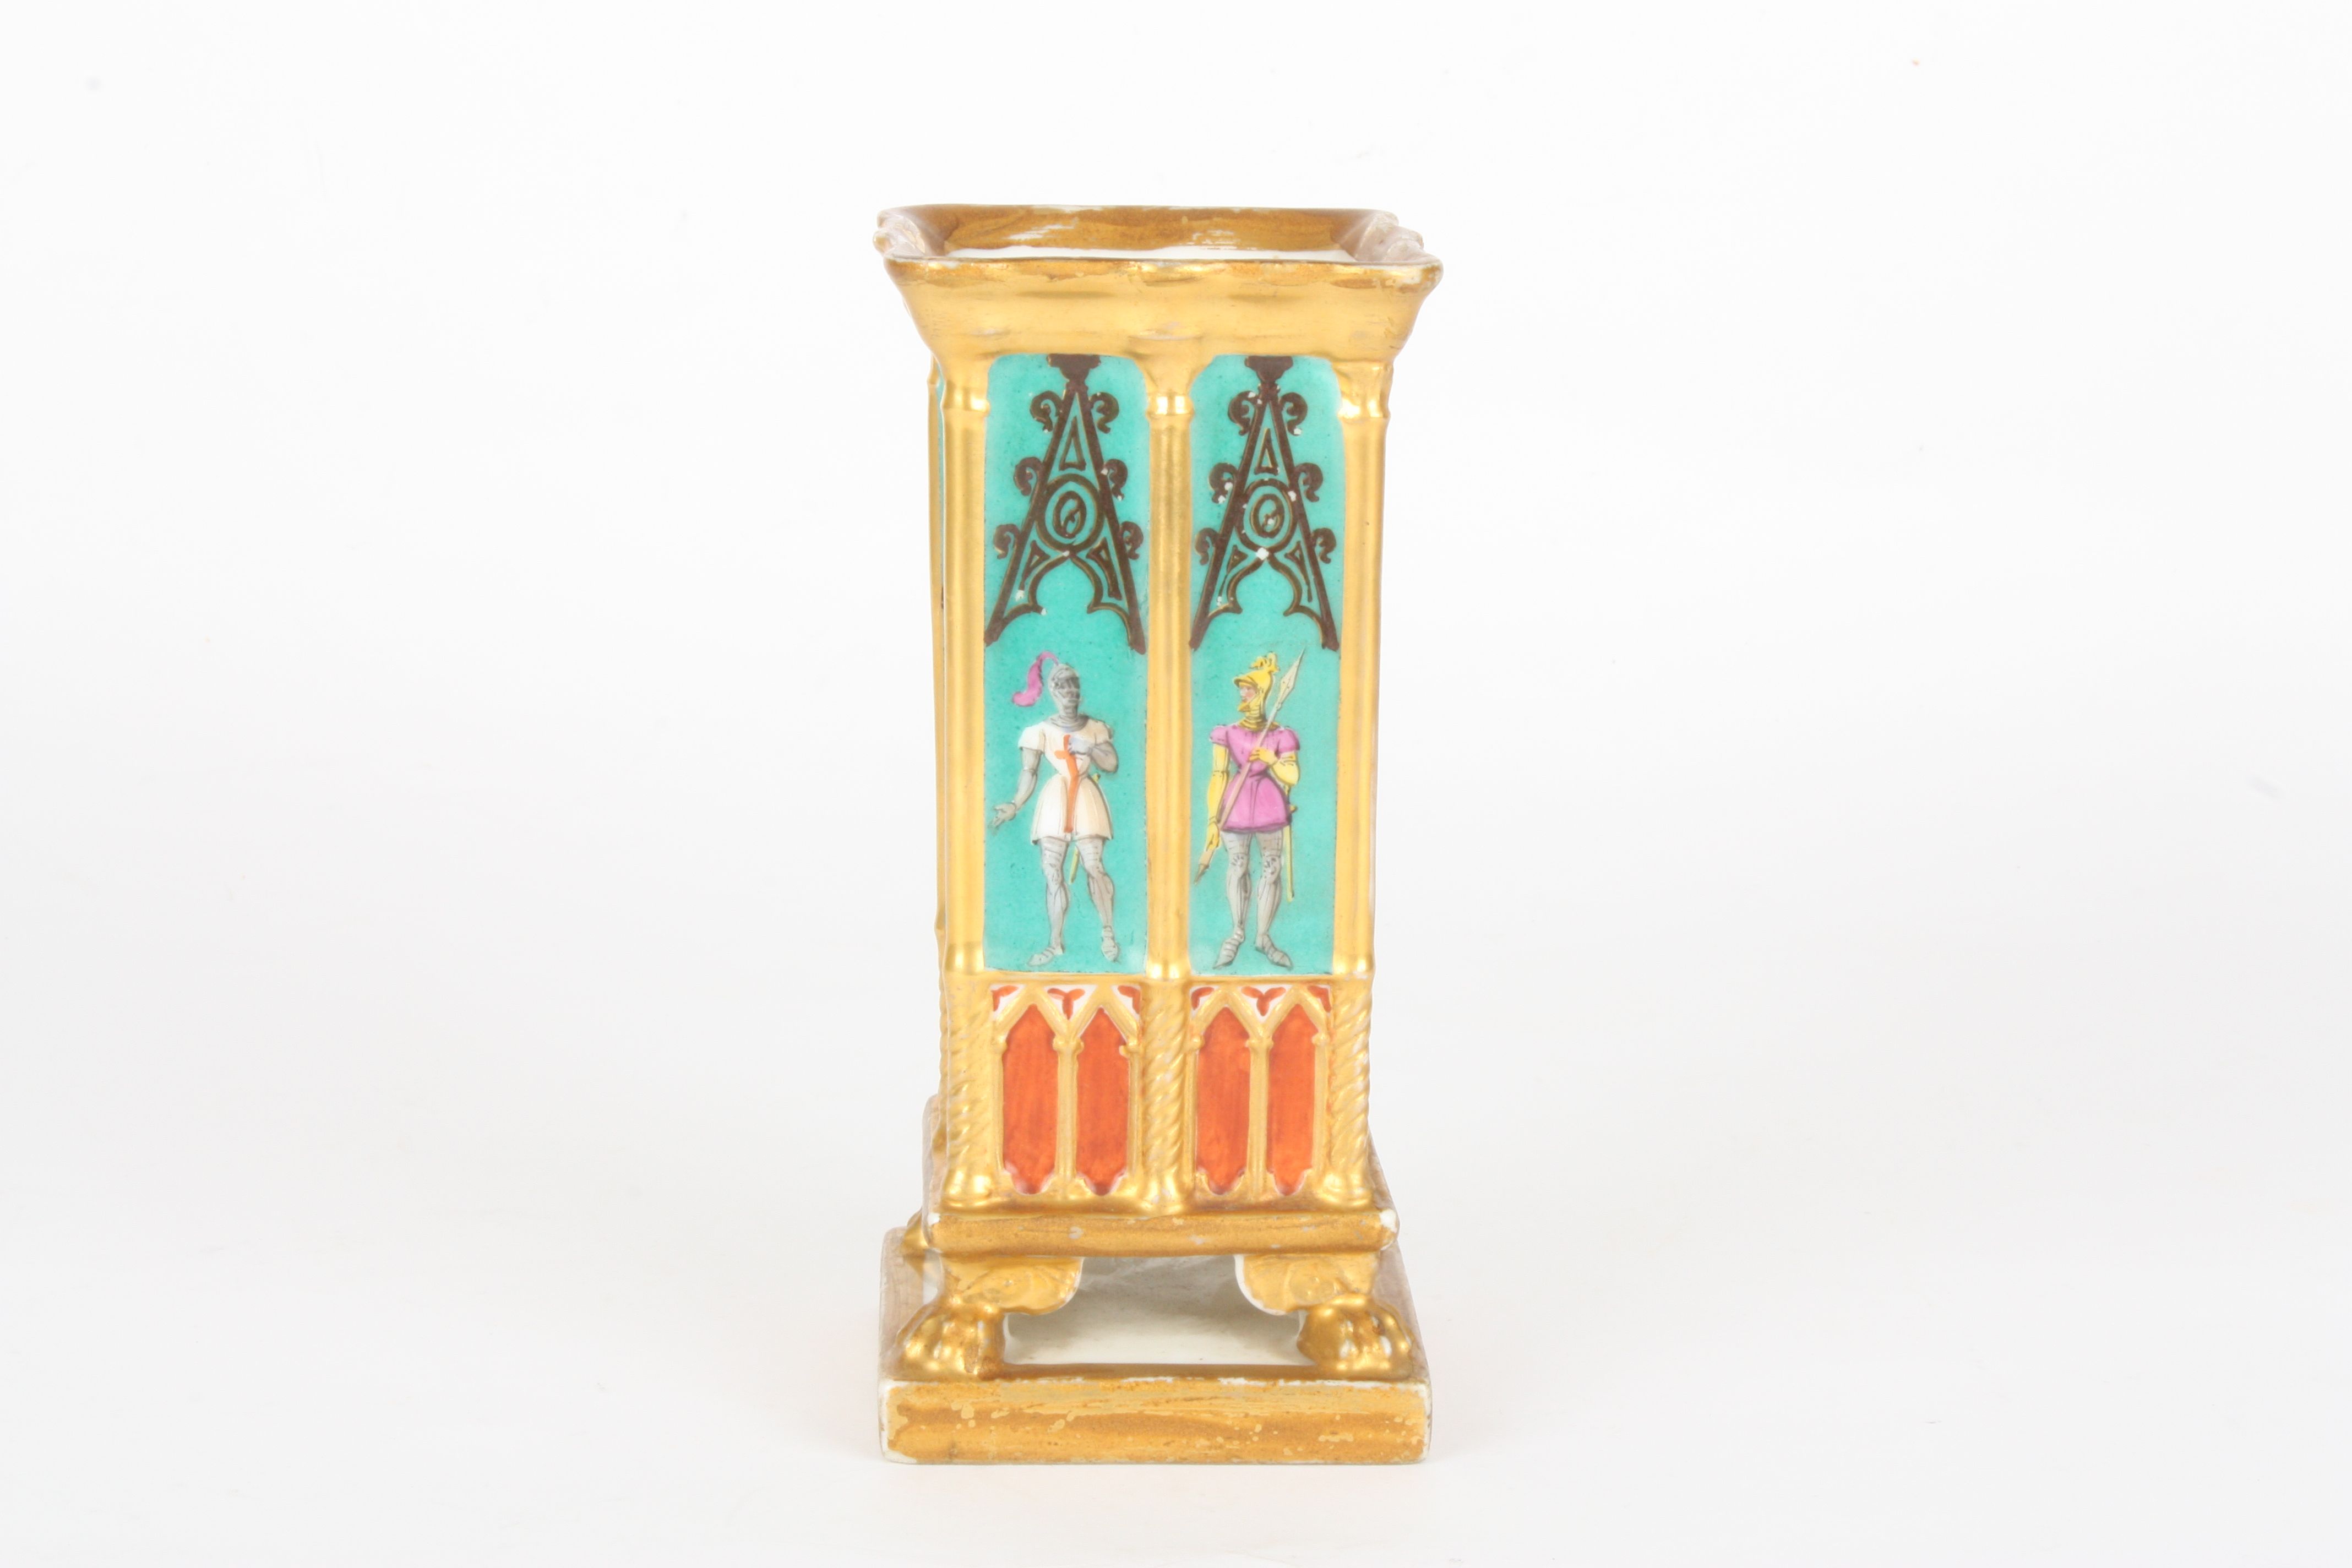 A 19th century French Darte porcelain Gothic design spill vase
of square form, painted with full